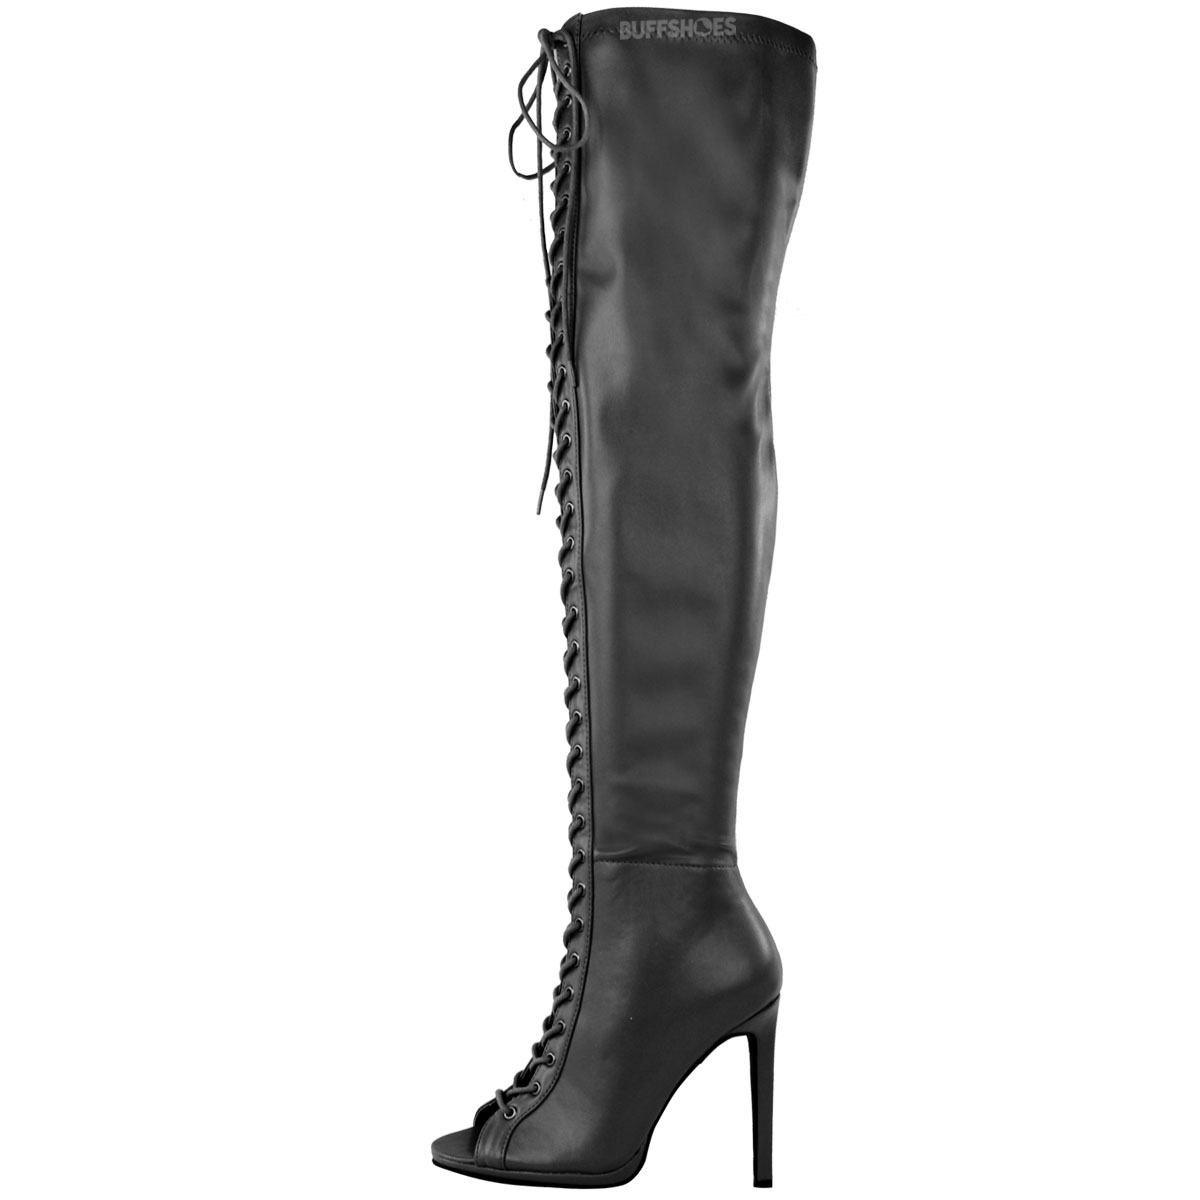 WOMENS LADIES THIGH HIGH OVER THE KNEE PLATFORM LACE UP BOOTS STILETTO ...